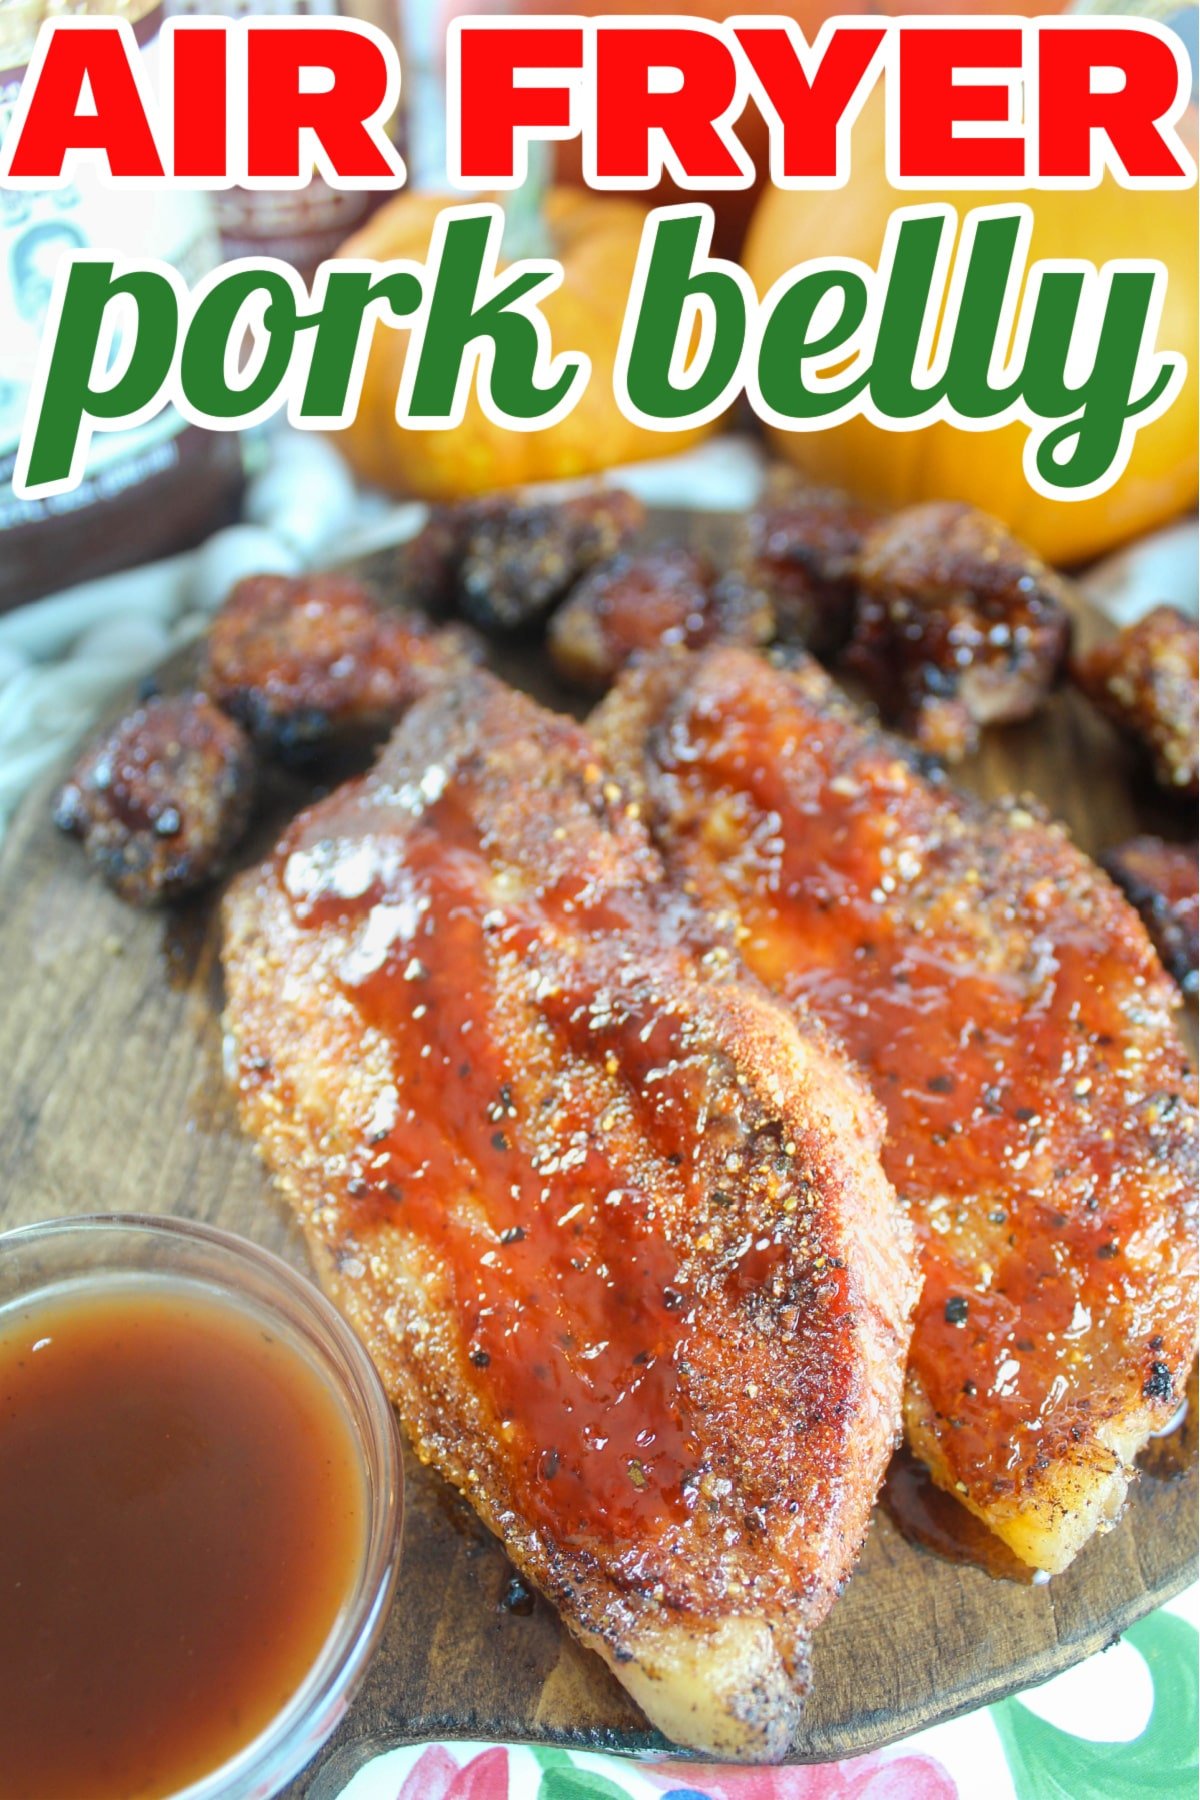 Air Fryer Pork Belly is a delightfully indulgent treat! Whether you make bites or slices - this pork belly will melt in your mouth and give you a whole new appreciate for pork belly!  via @foodhussy